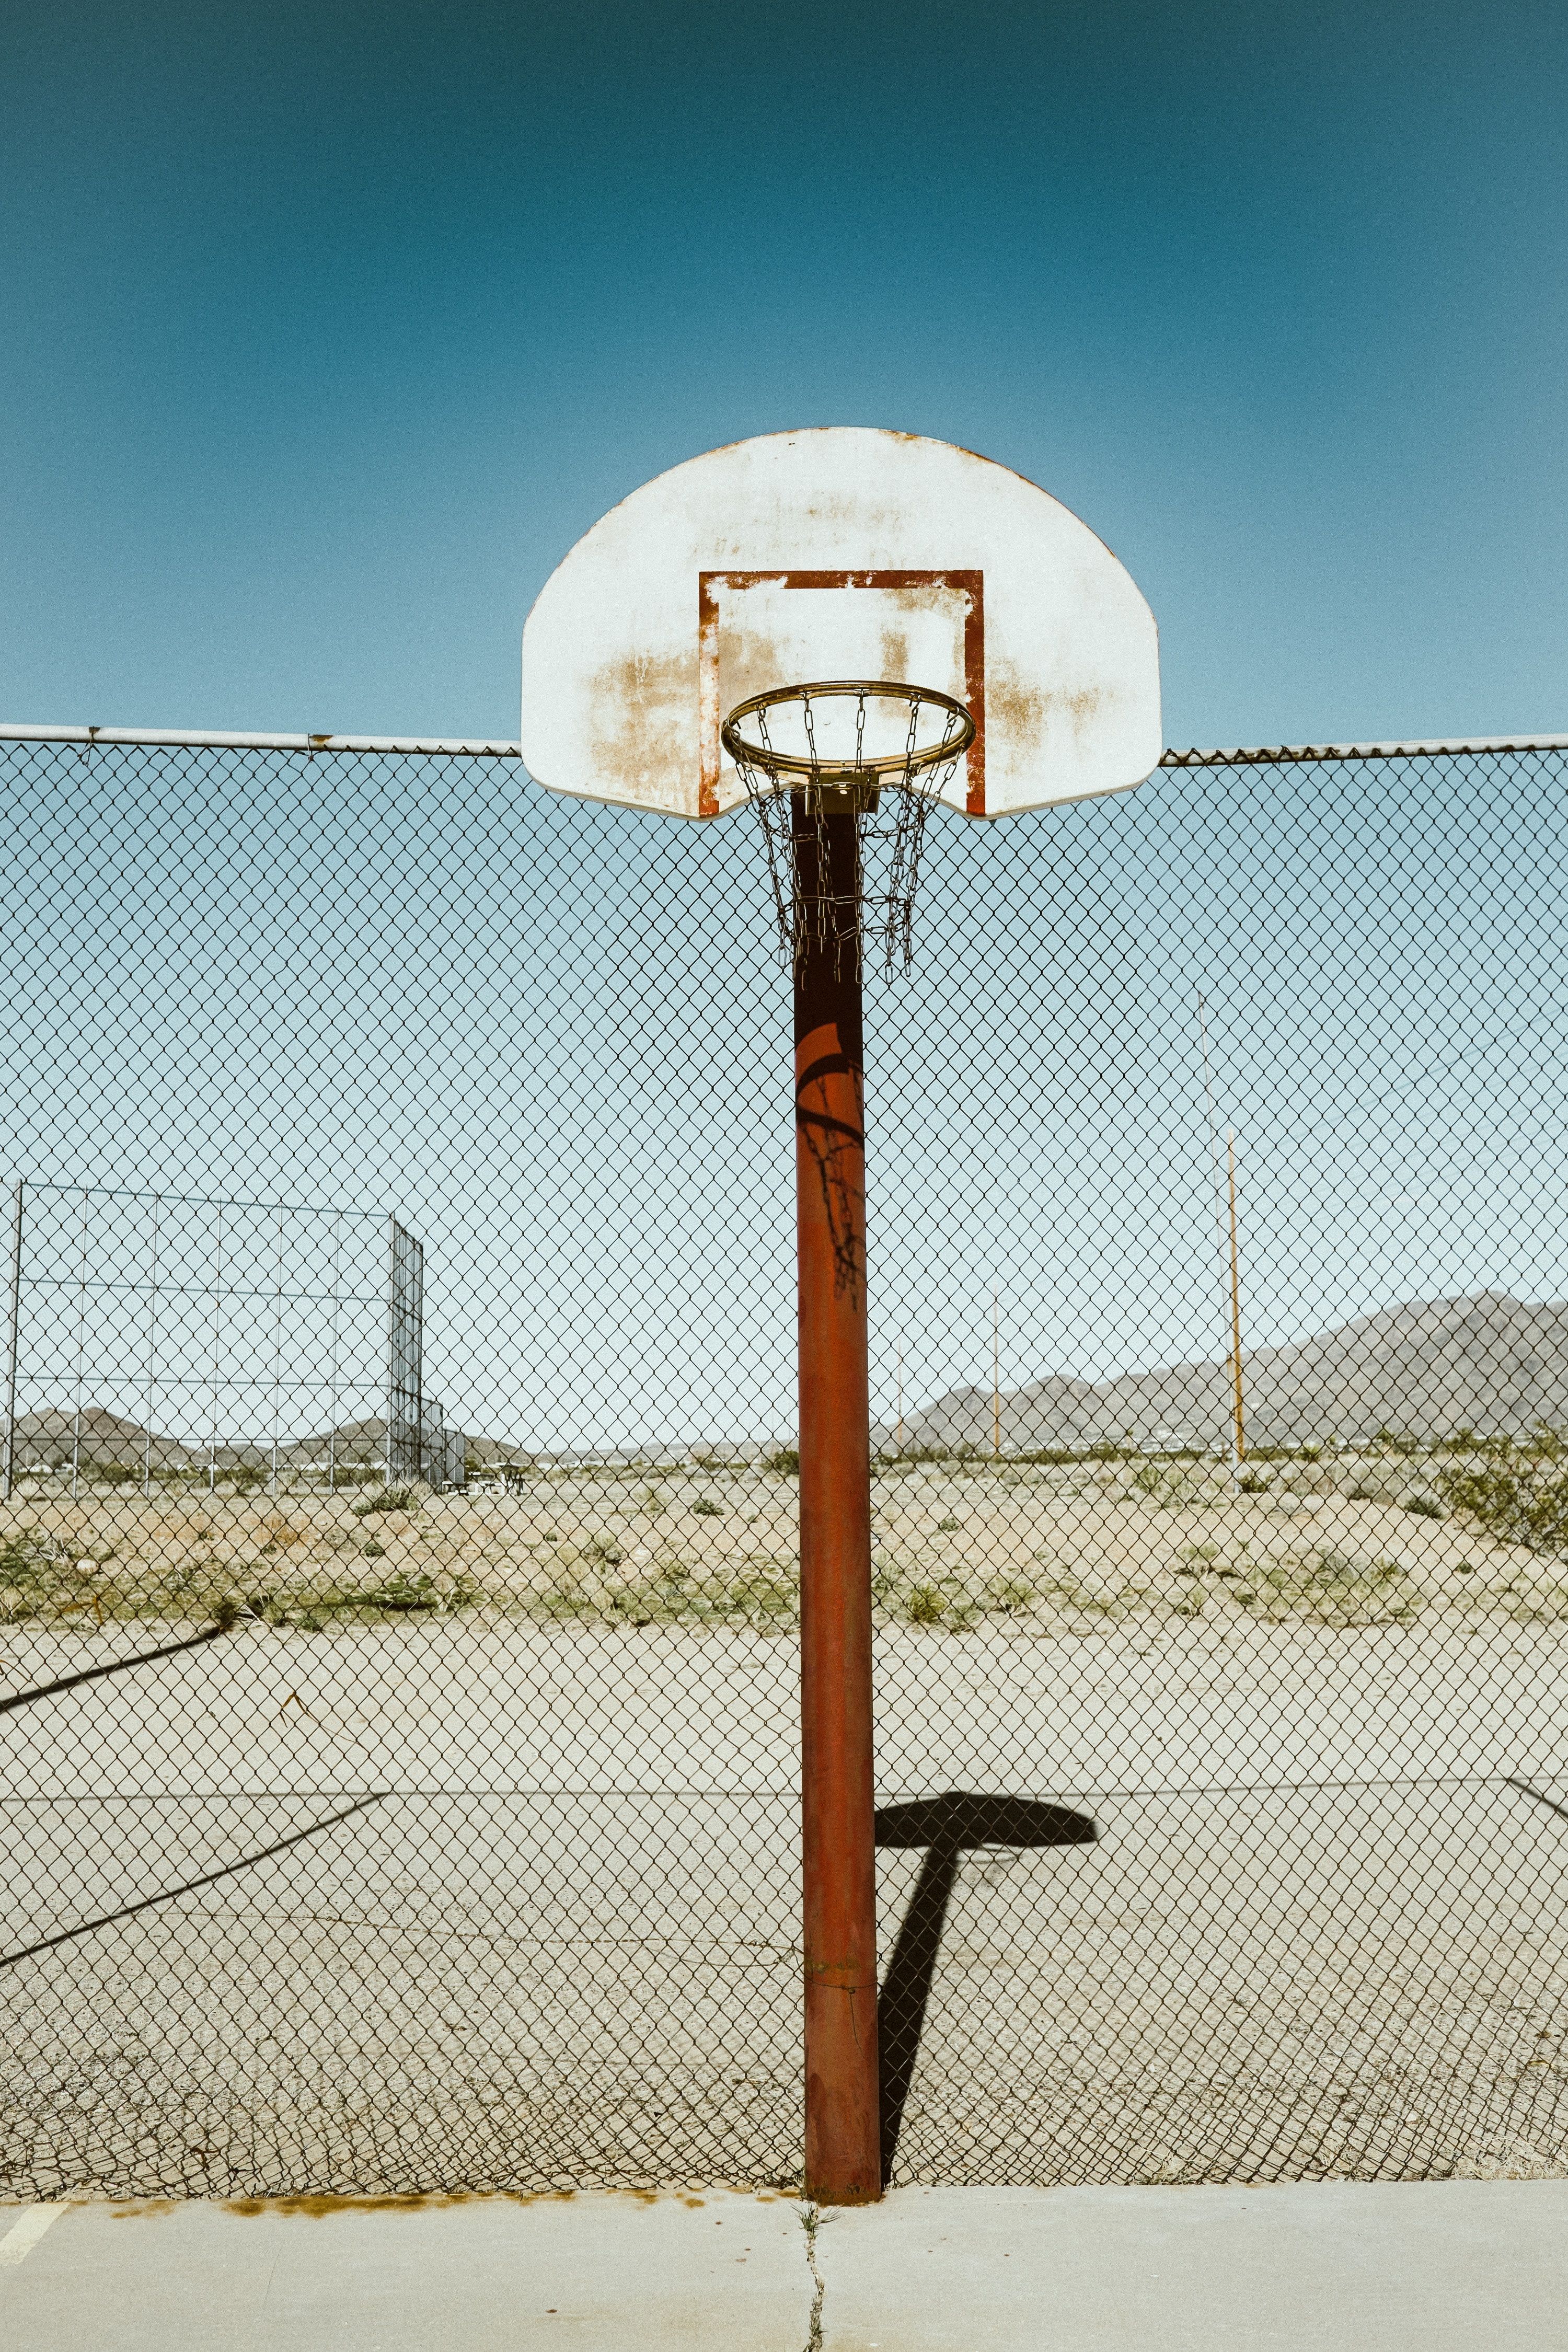 Download wallpaper 3000x4500 basketball court, old, grid, fence HD